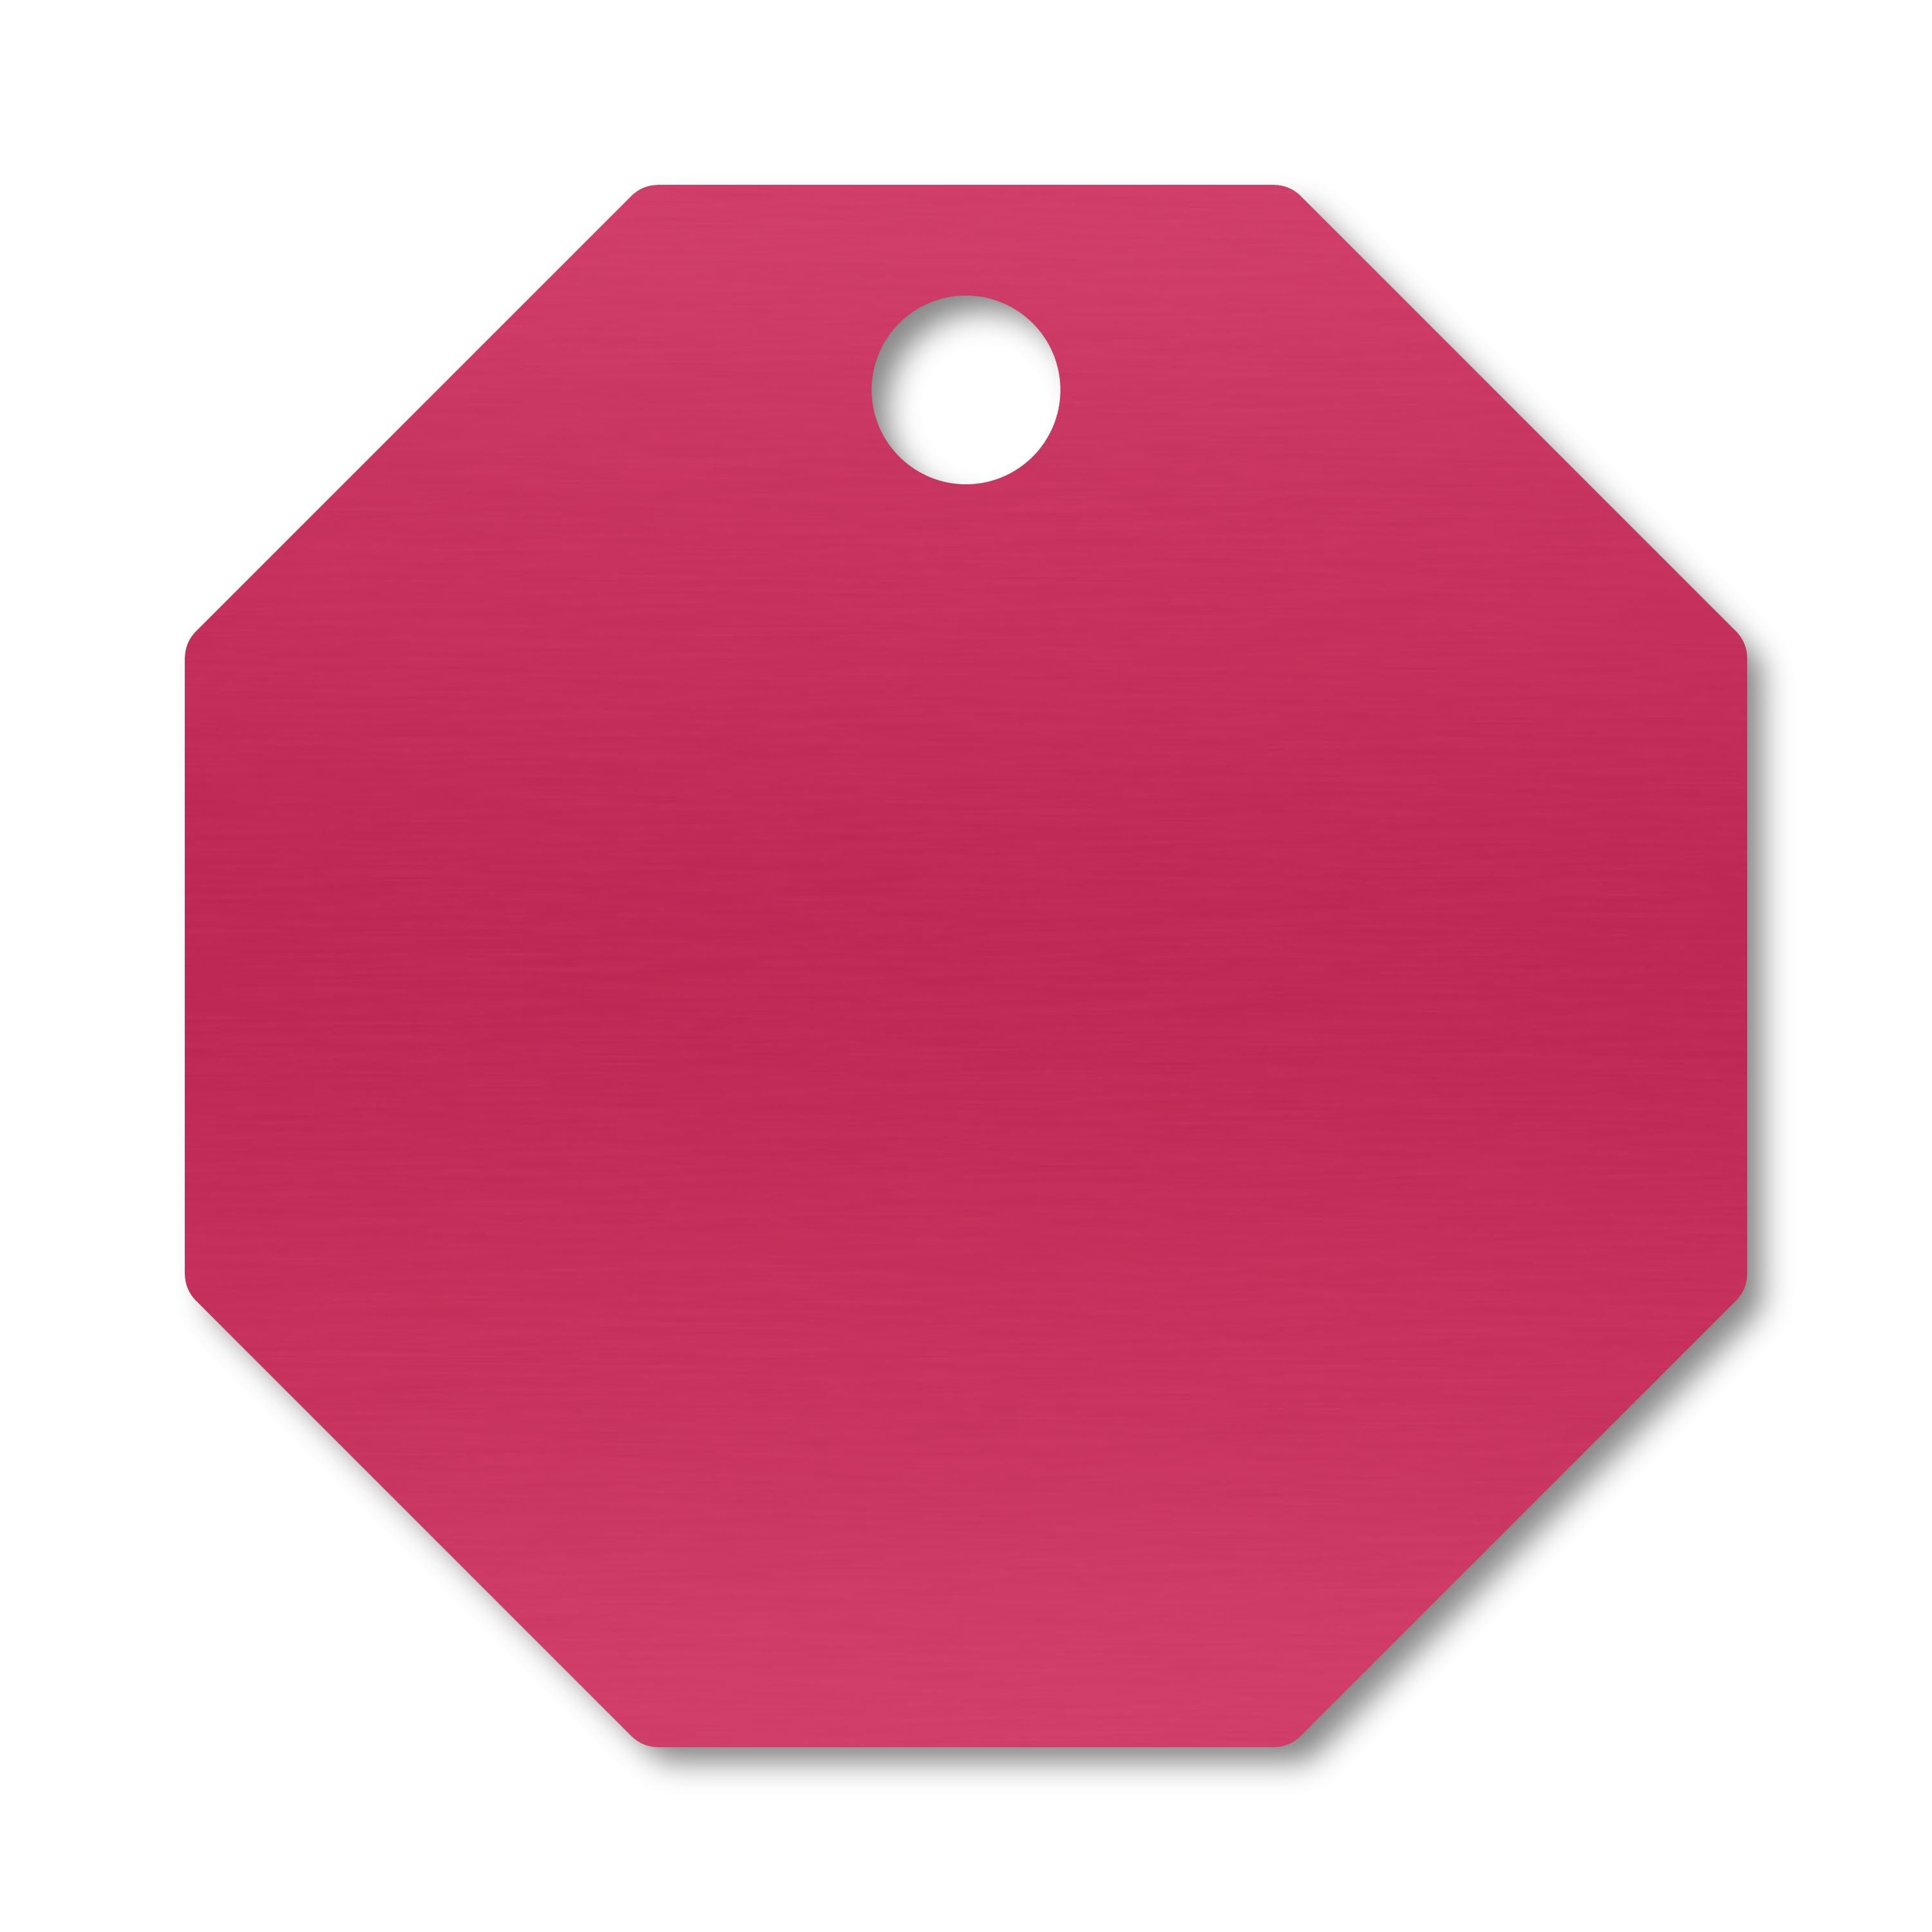 Anodized Aluminum Octagon Tags, 1-1/8" with 1/8" Hole, Laser Engraved Metal Tags Craftworks NW Pink 